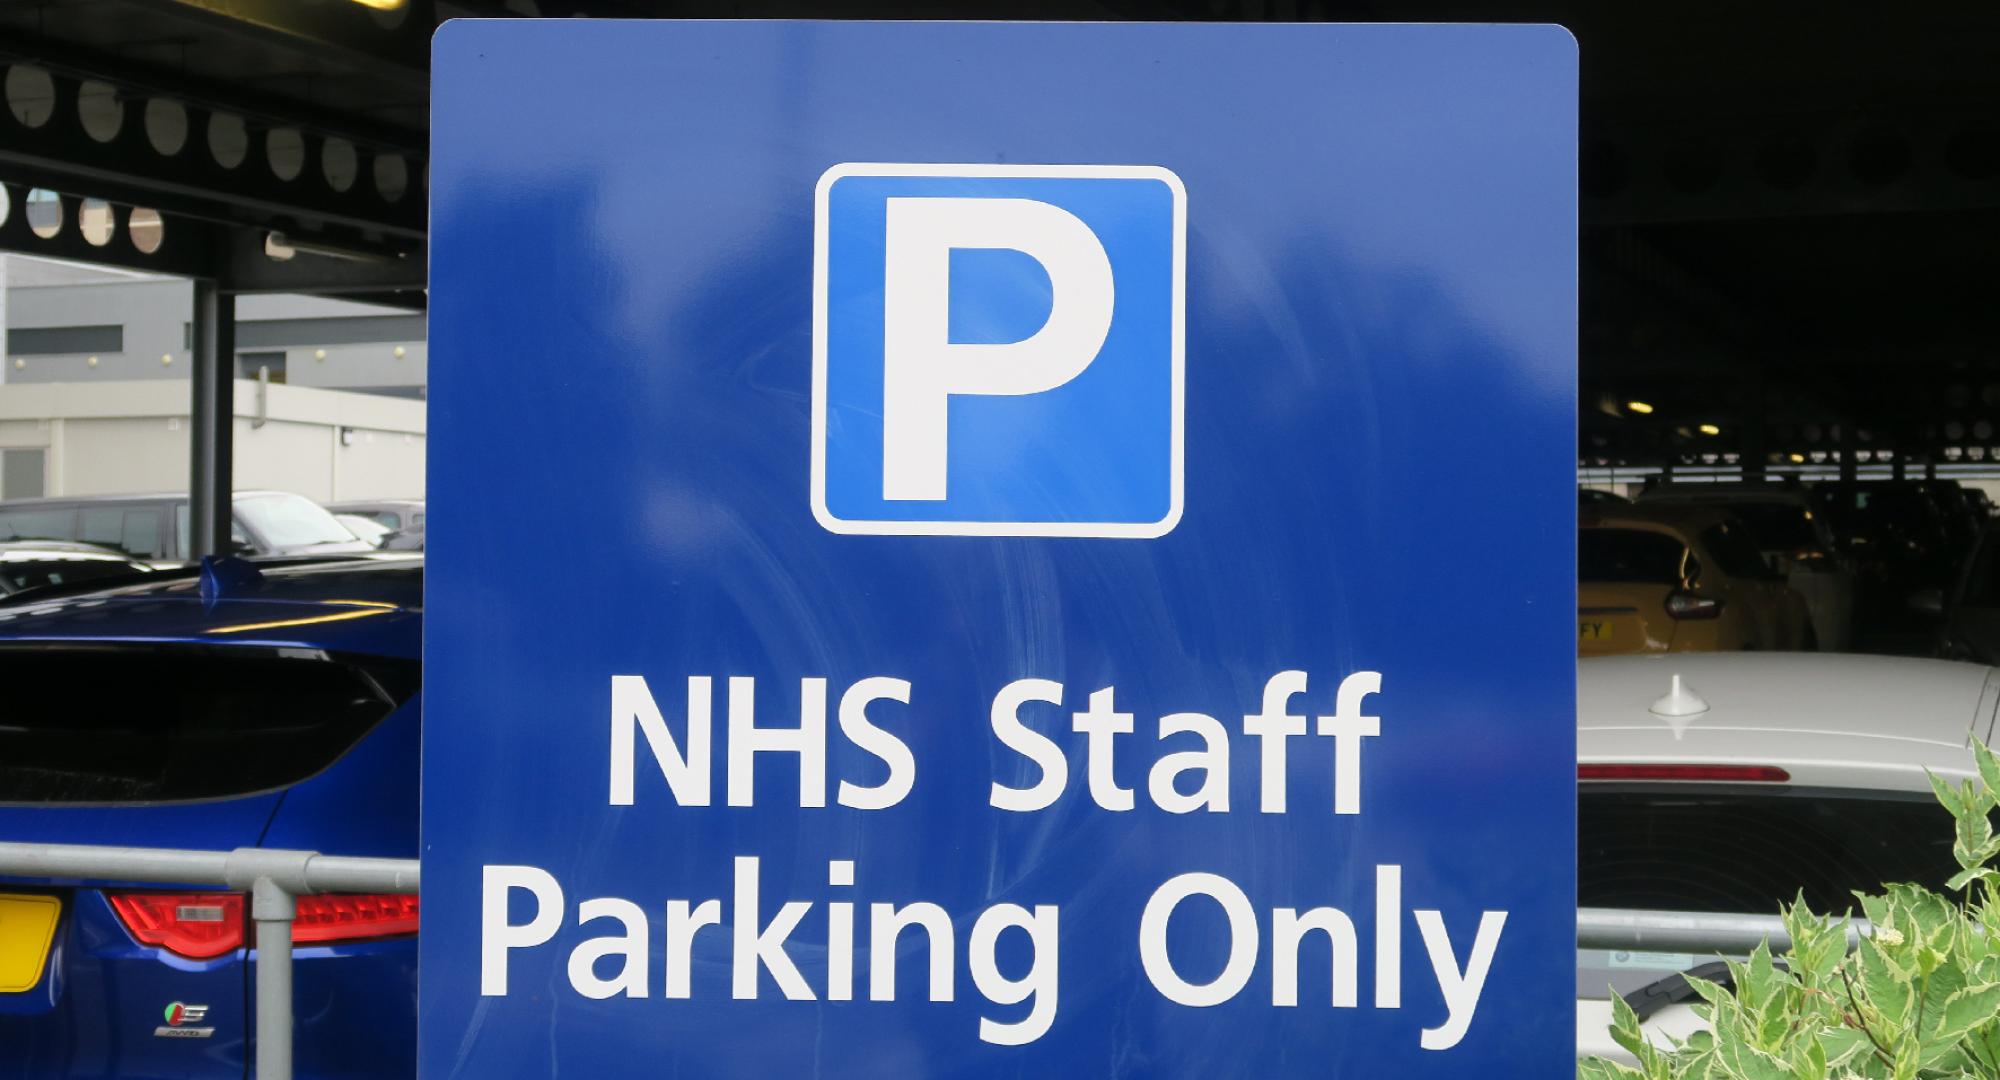 NHS Staff Parking Only sign